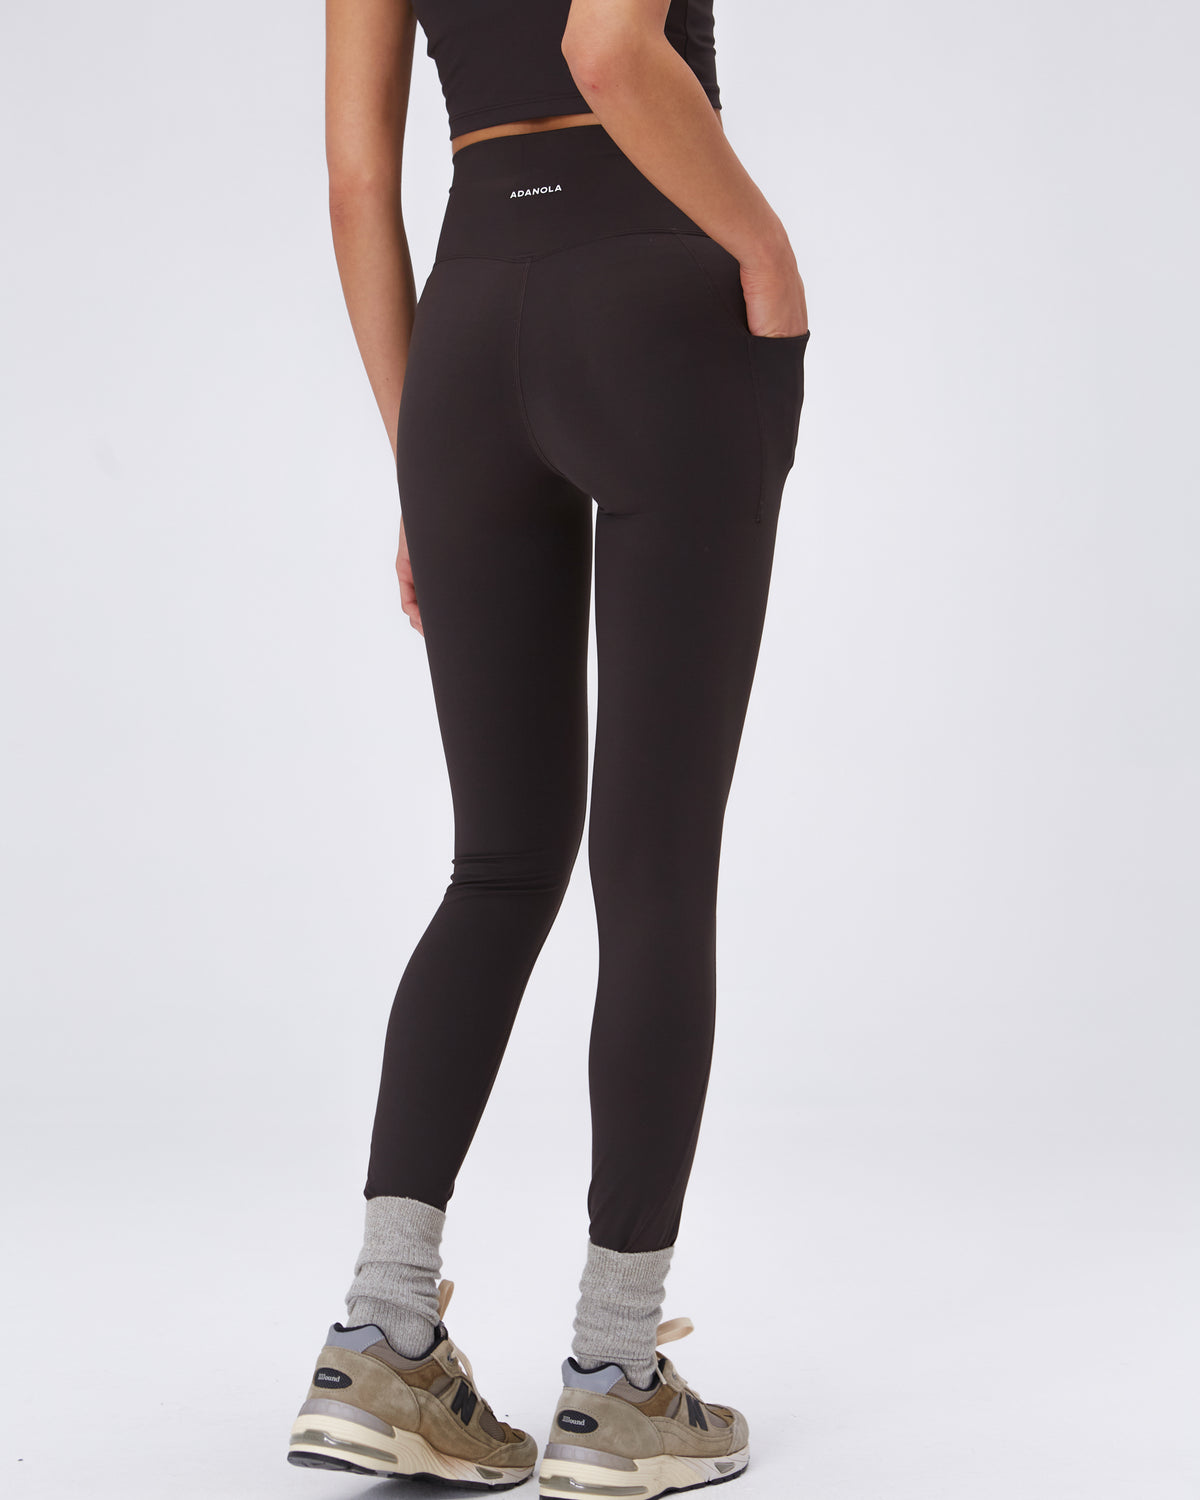 Lucy activewear perfect core - Gem